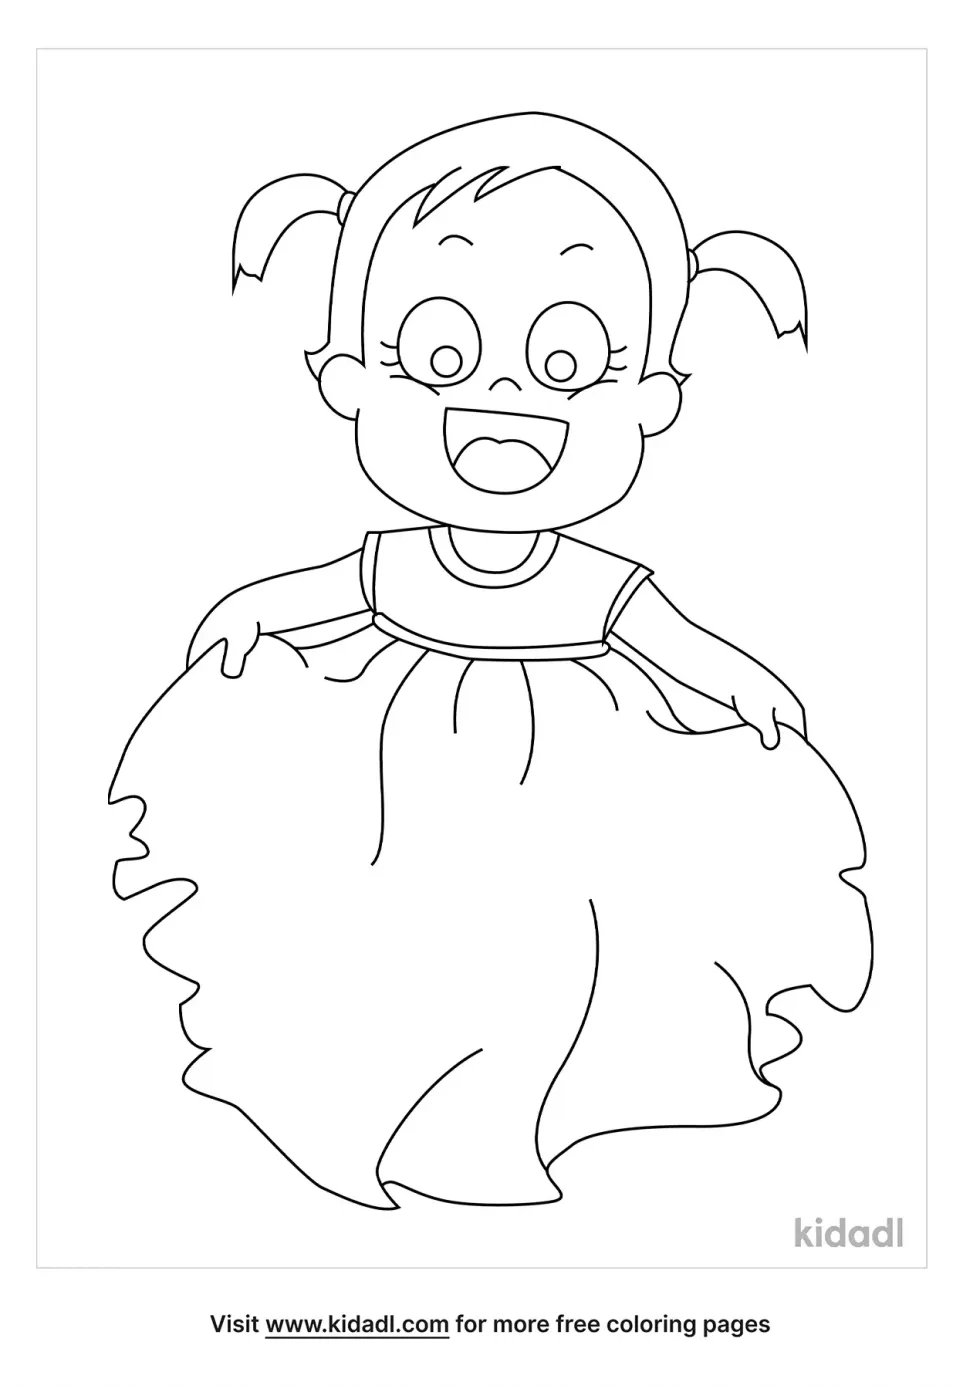 Wearing A Dress Coloring Page